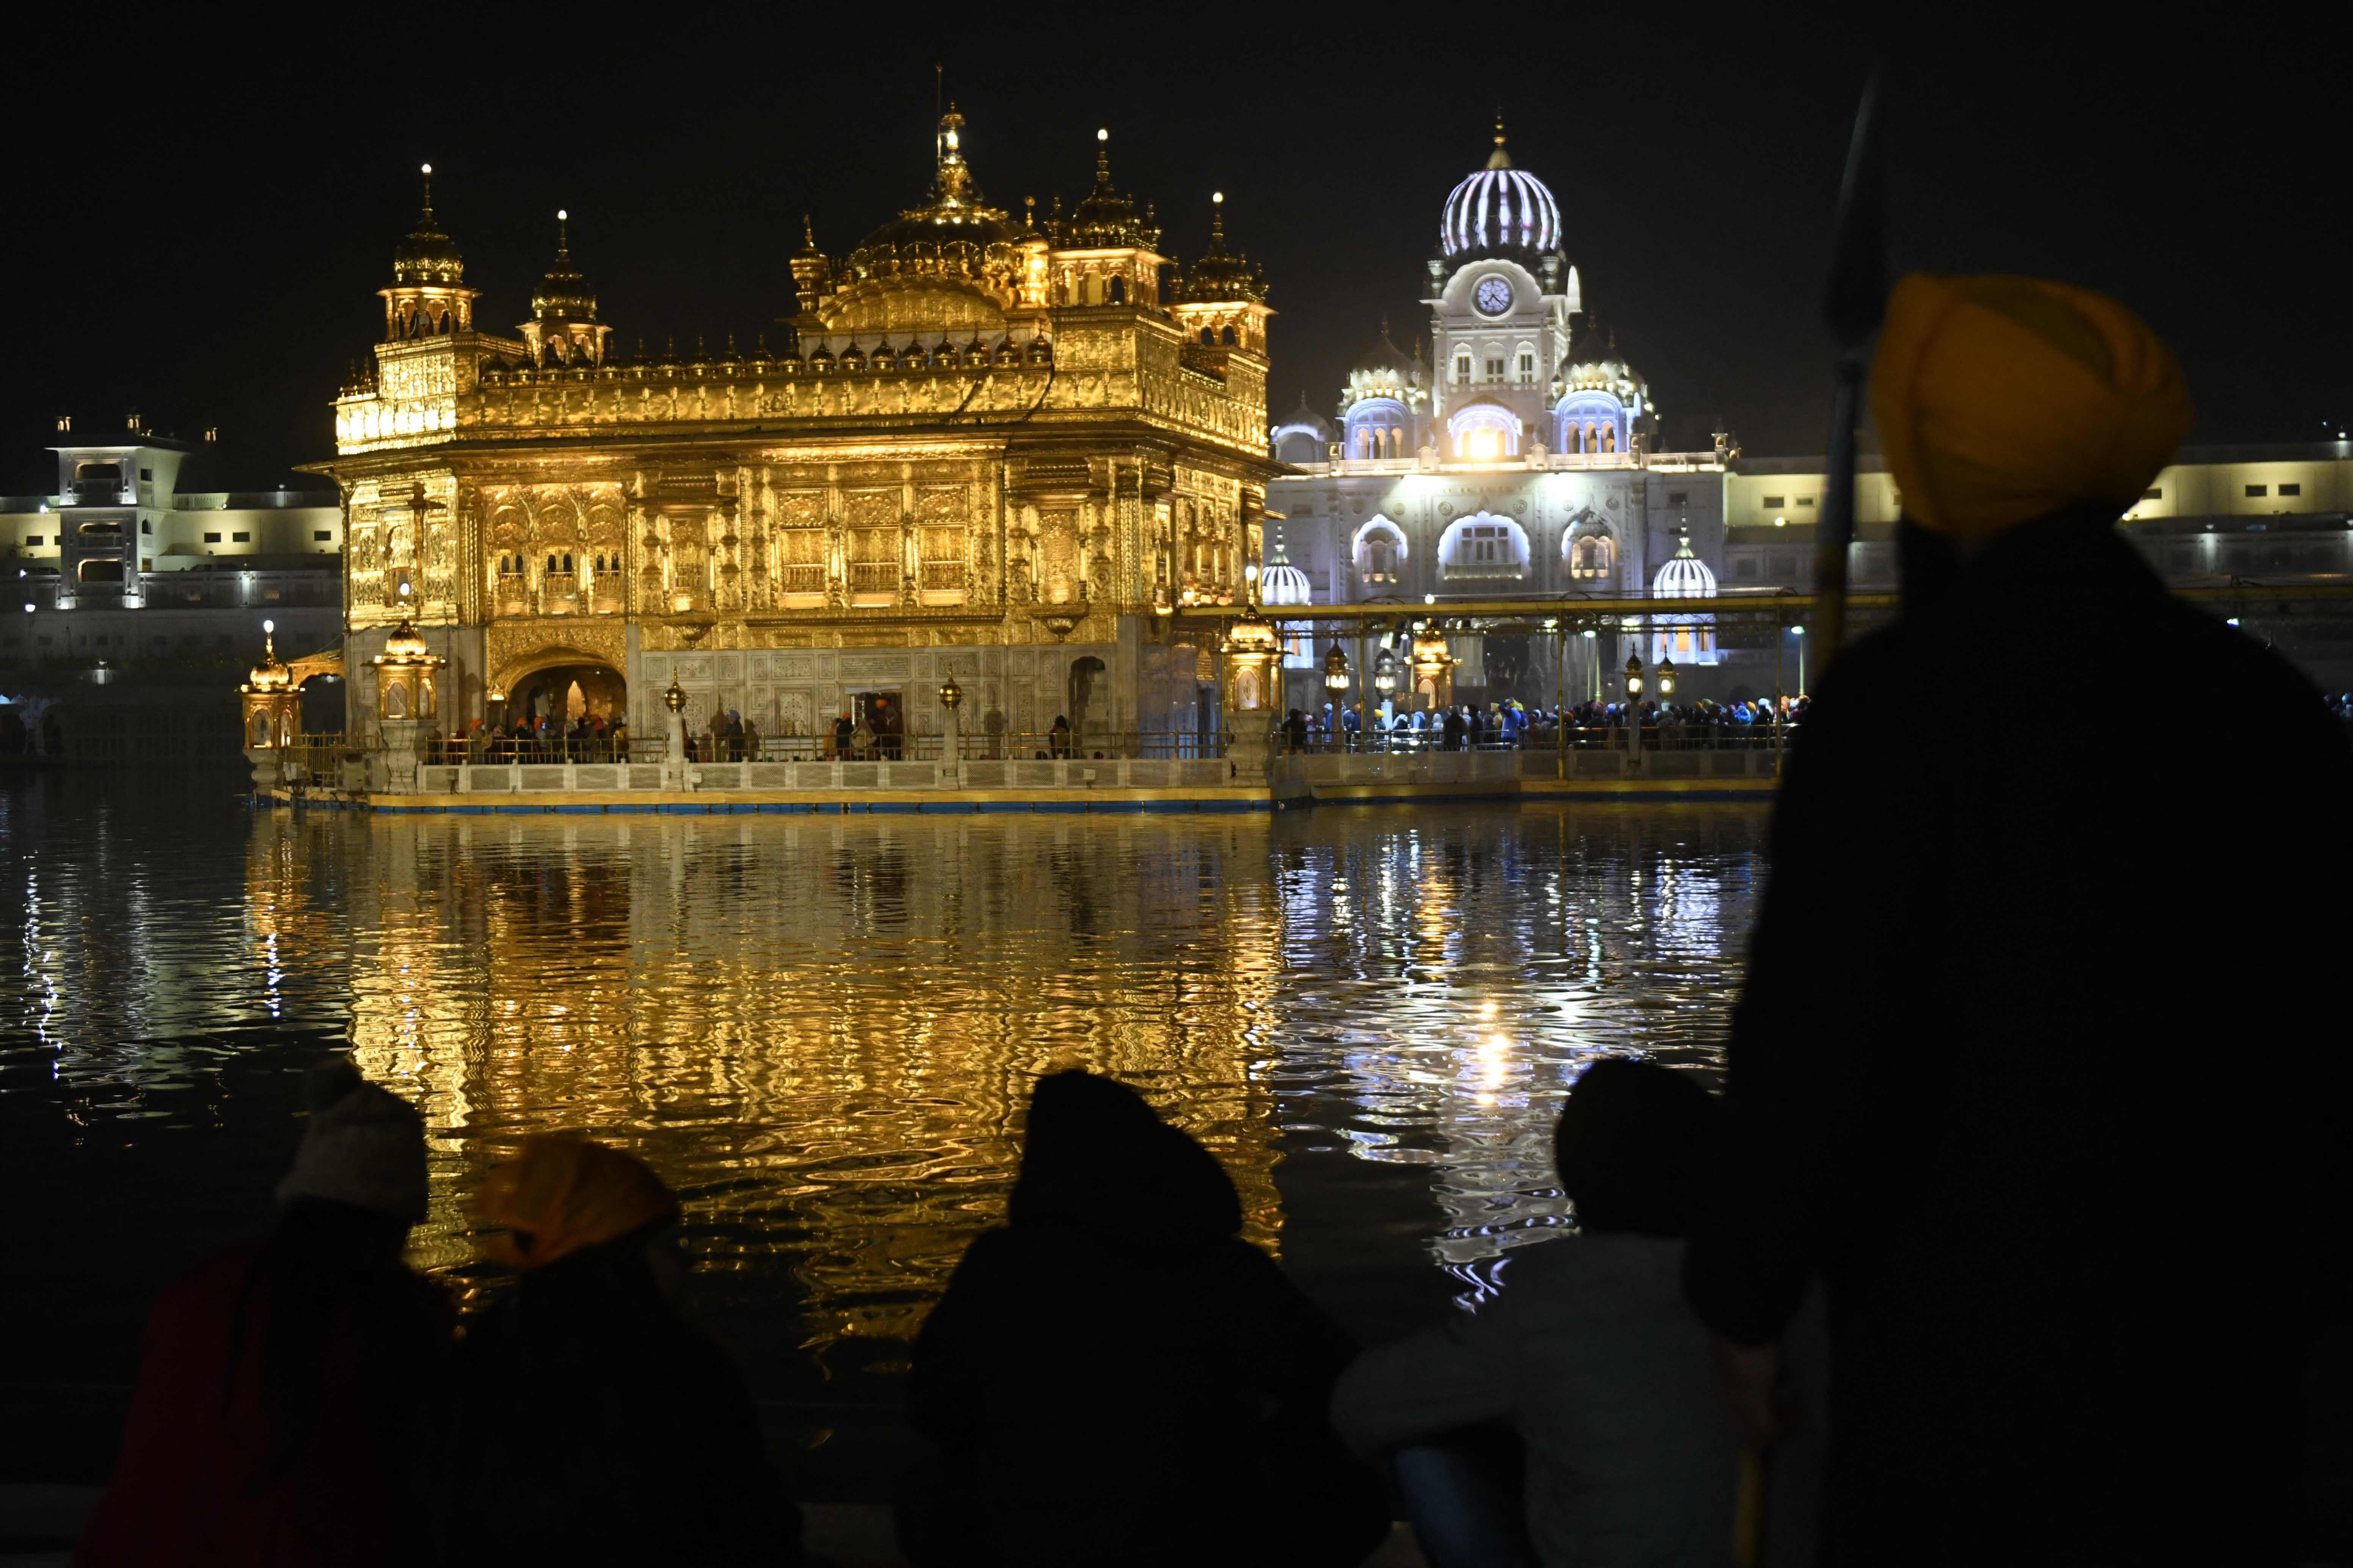 Police say a man was killed in a ‘violent altercation’ after he attempted sacrilegious act inside the Golden Temple, Amritsar, Punjab